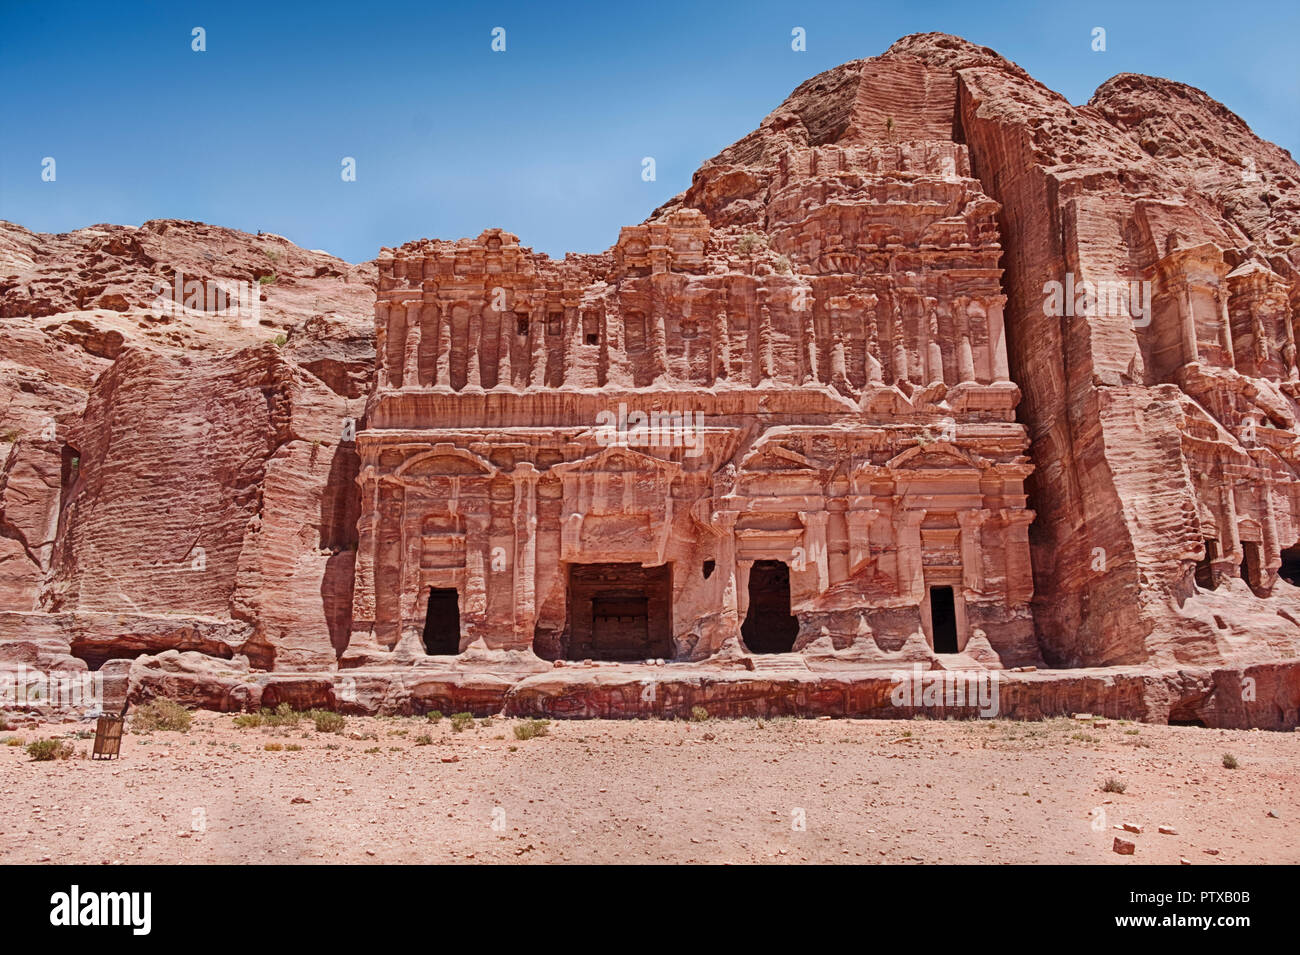 The ancient Palace Tomb of Petra in Jordan has a magnificant facade that has been carved into the sandstone cliffs. Stock Photo